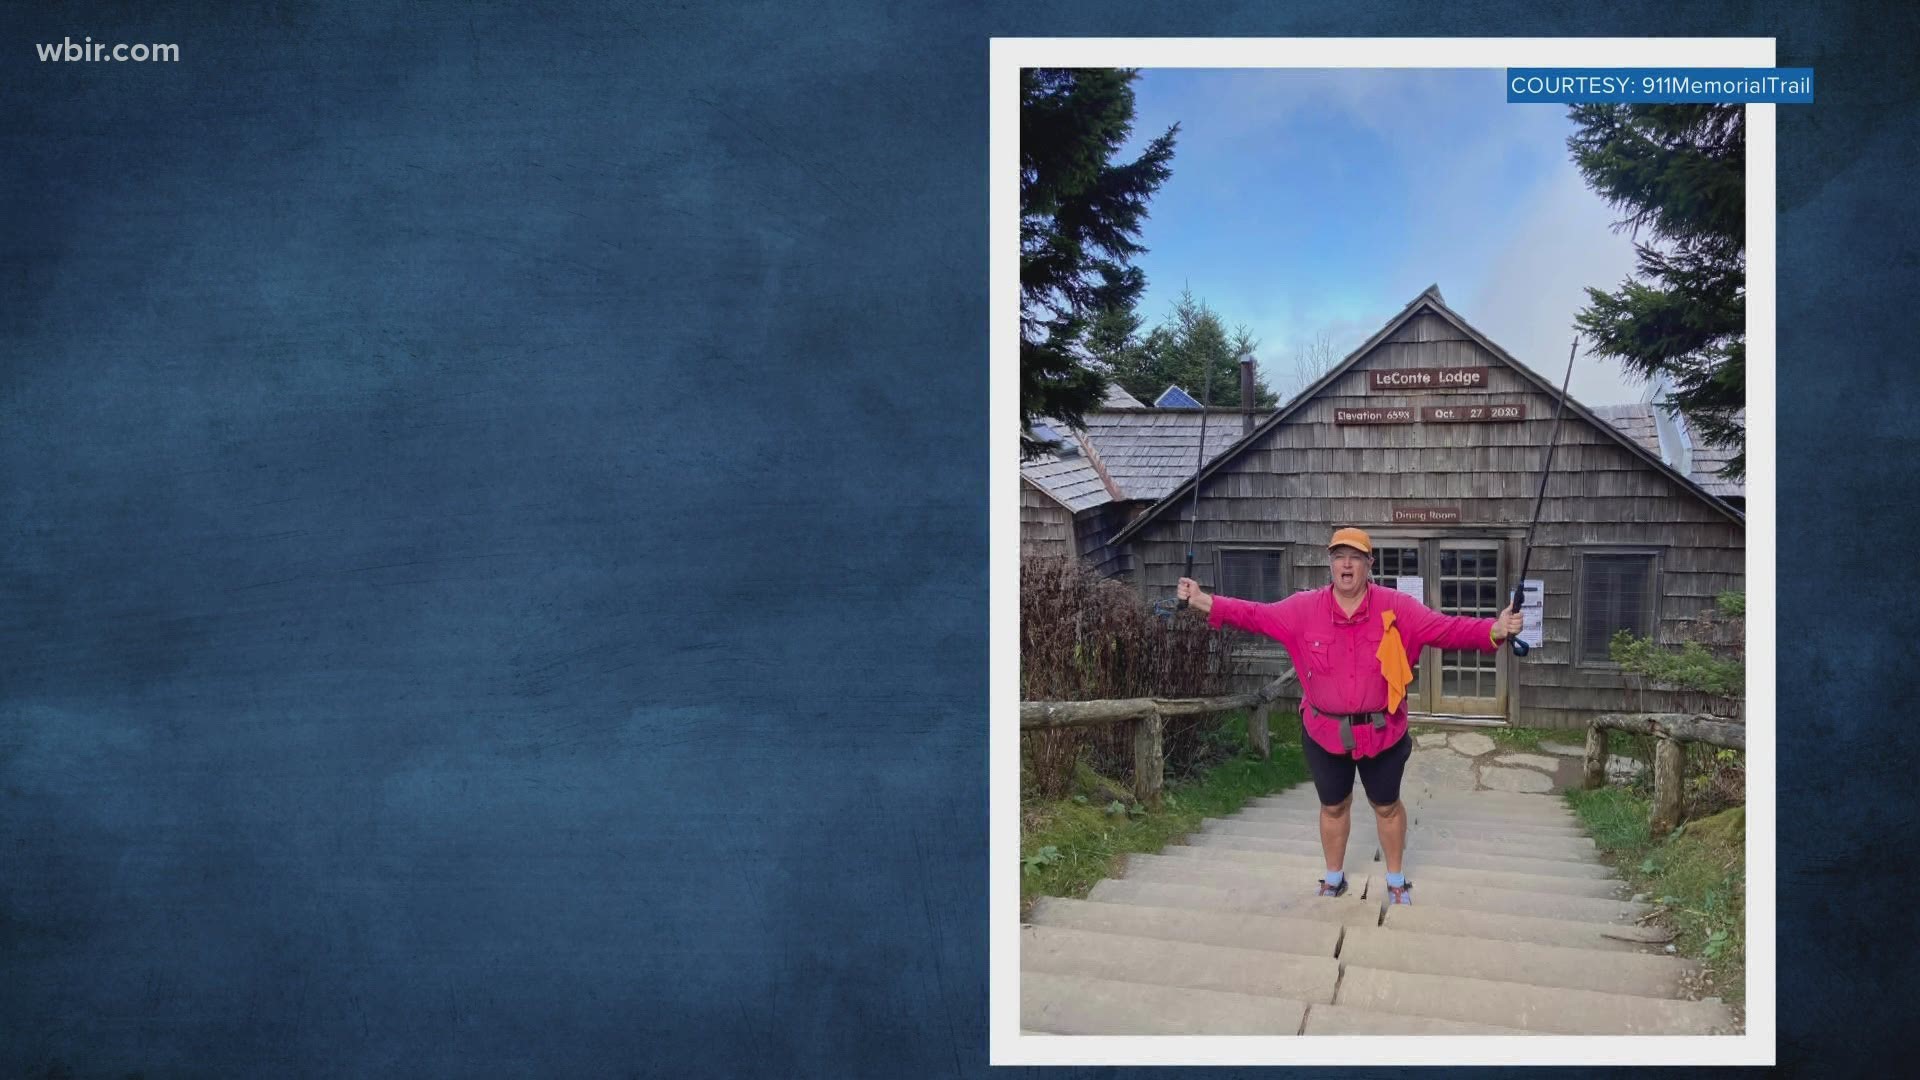 Jan Walker was the first to complete the virtual 9/11 National Memorial Trail Challenge